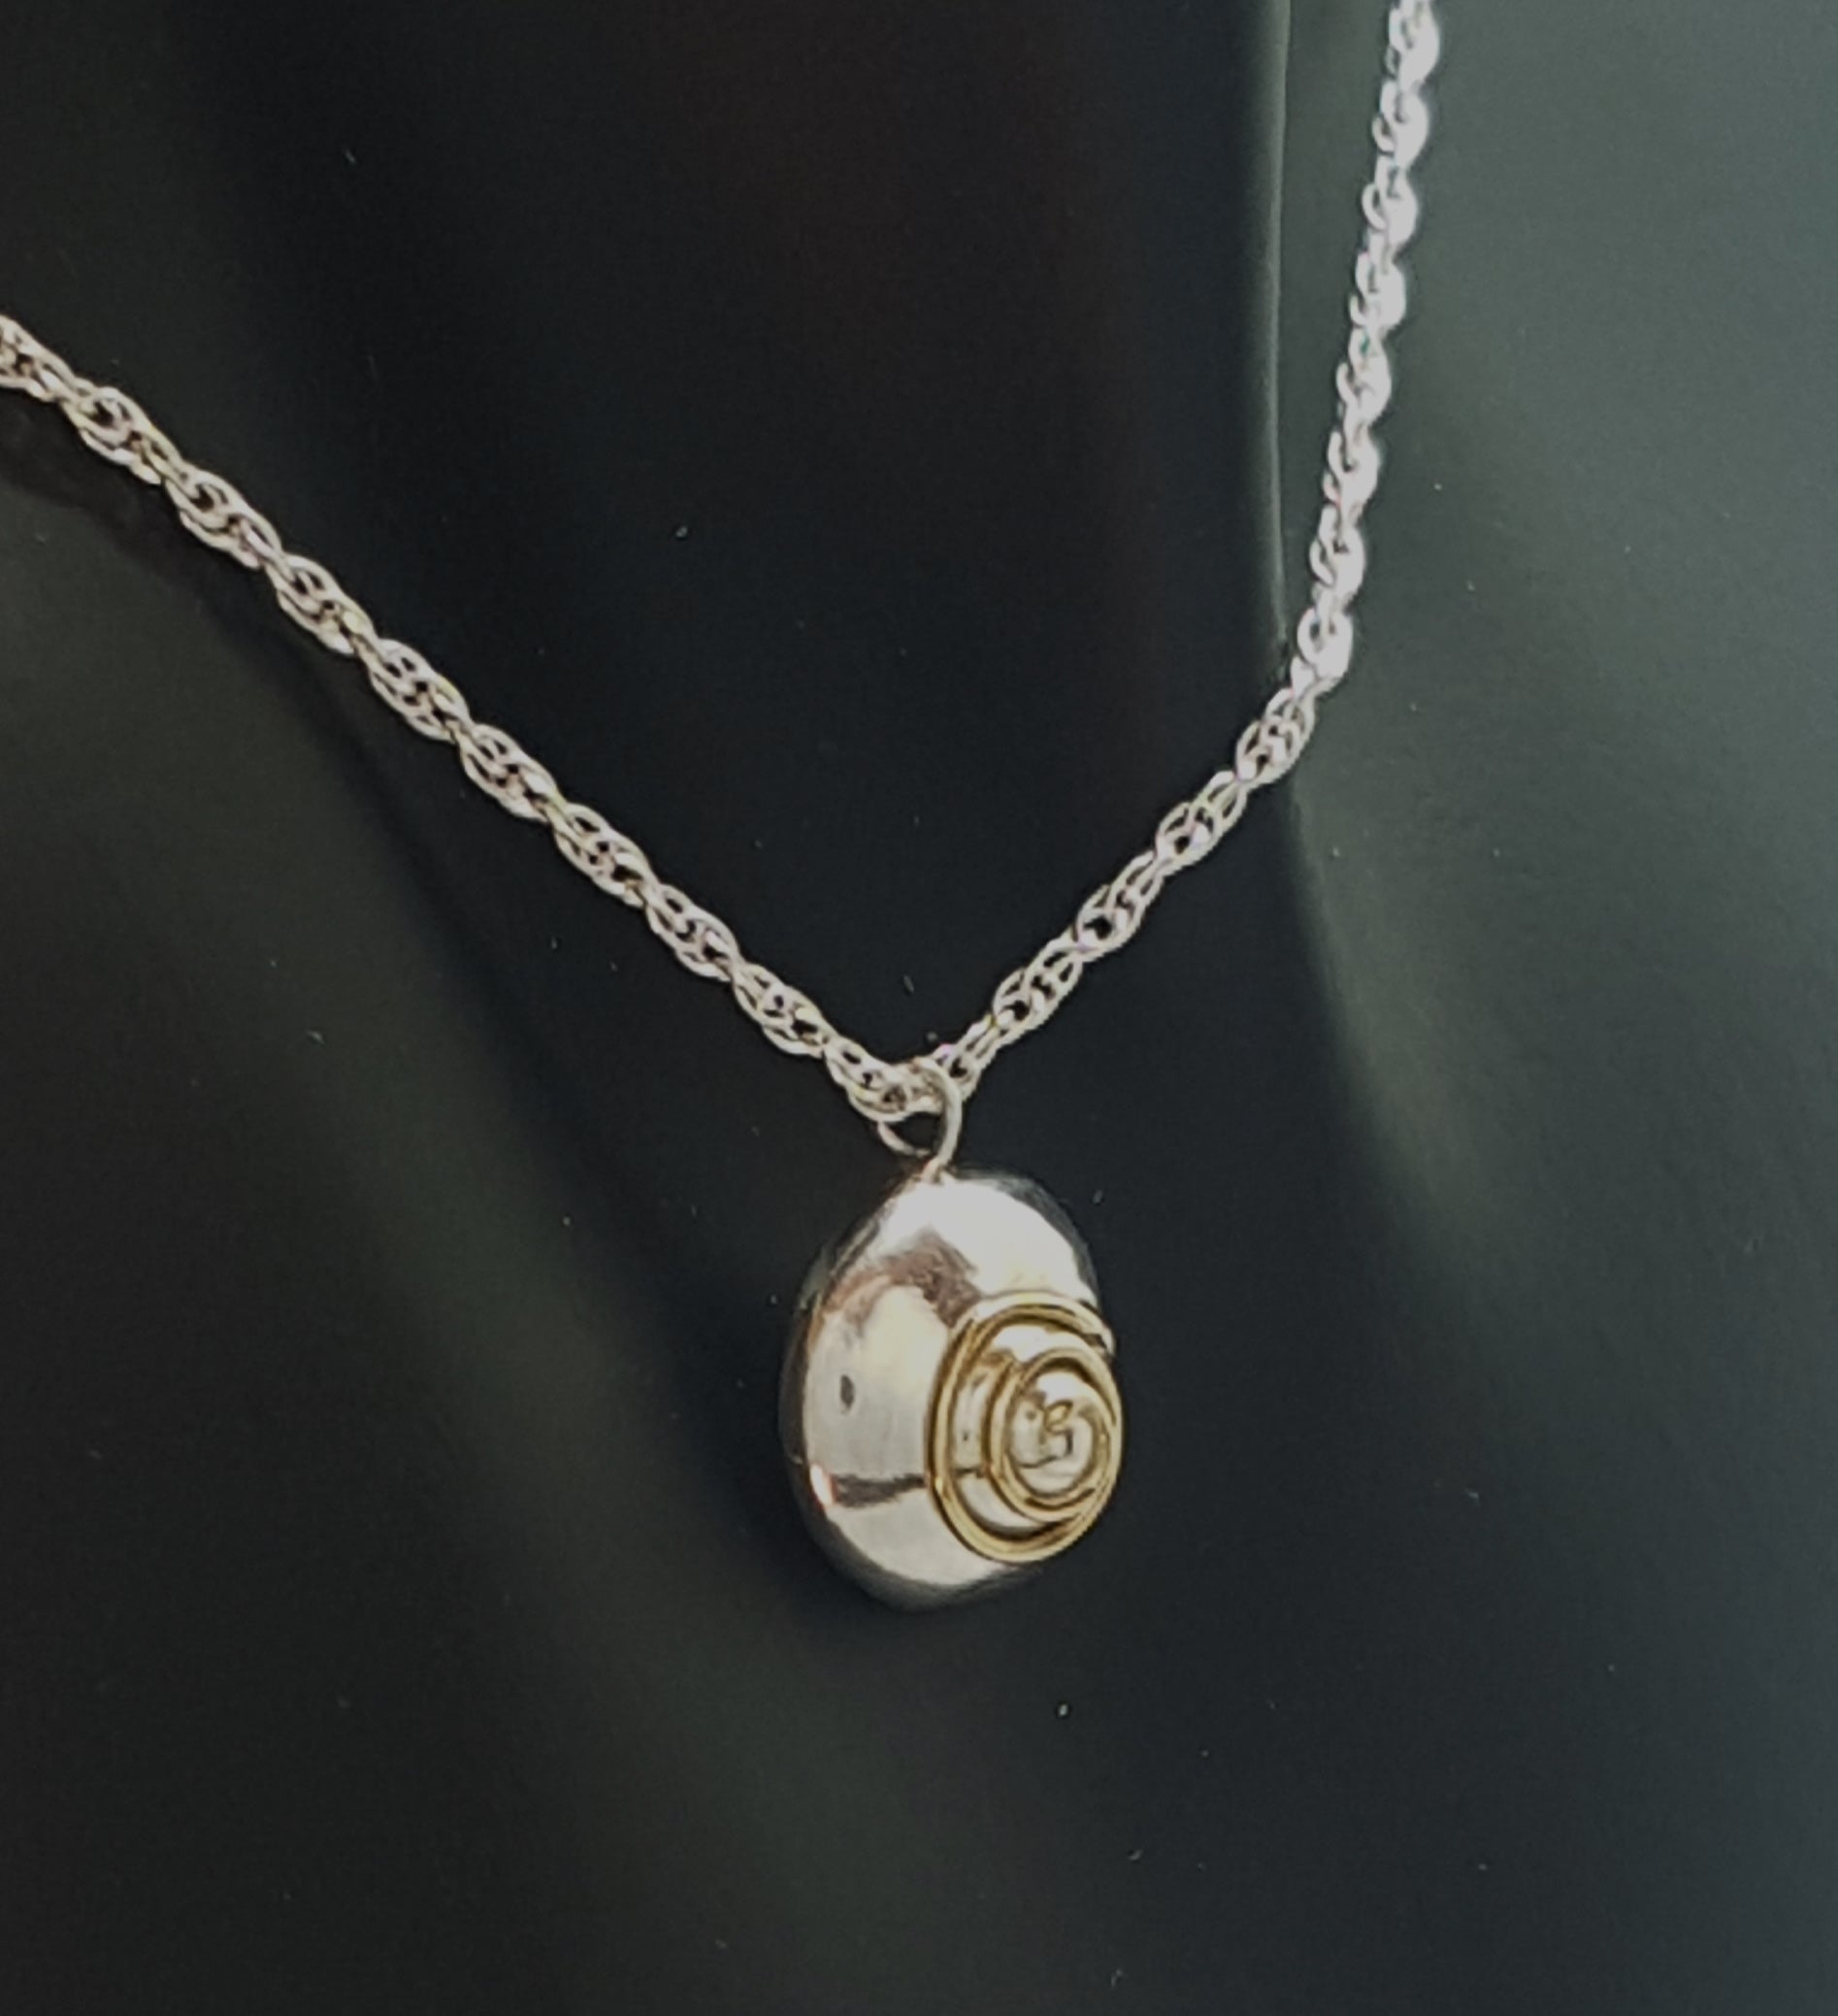 Whorled Silver/Gold Shell - Necklace/Pendant